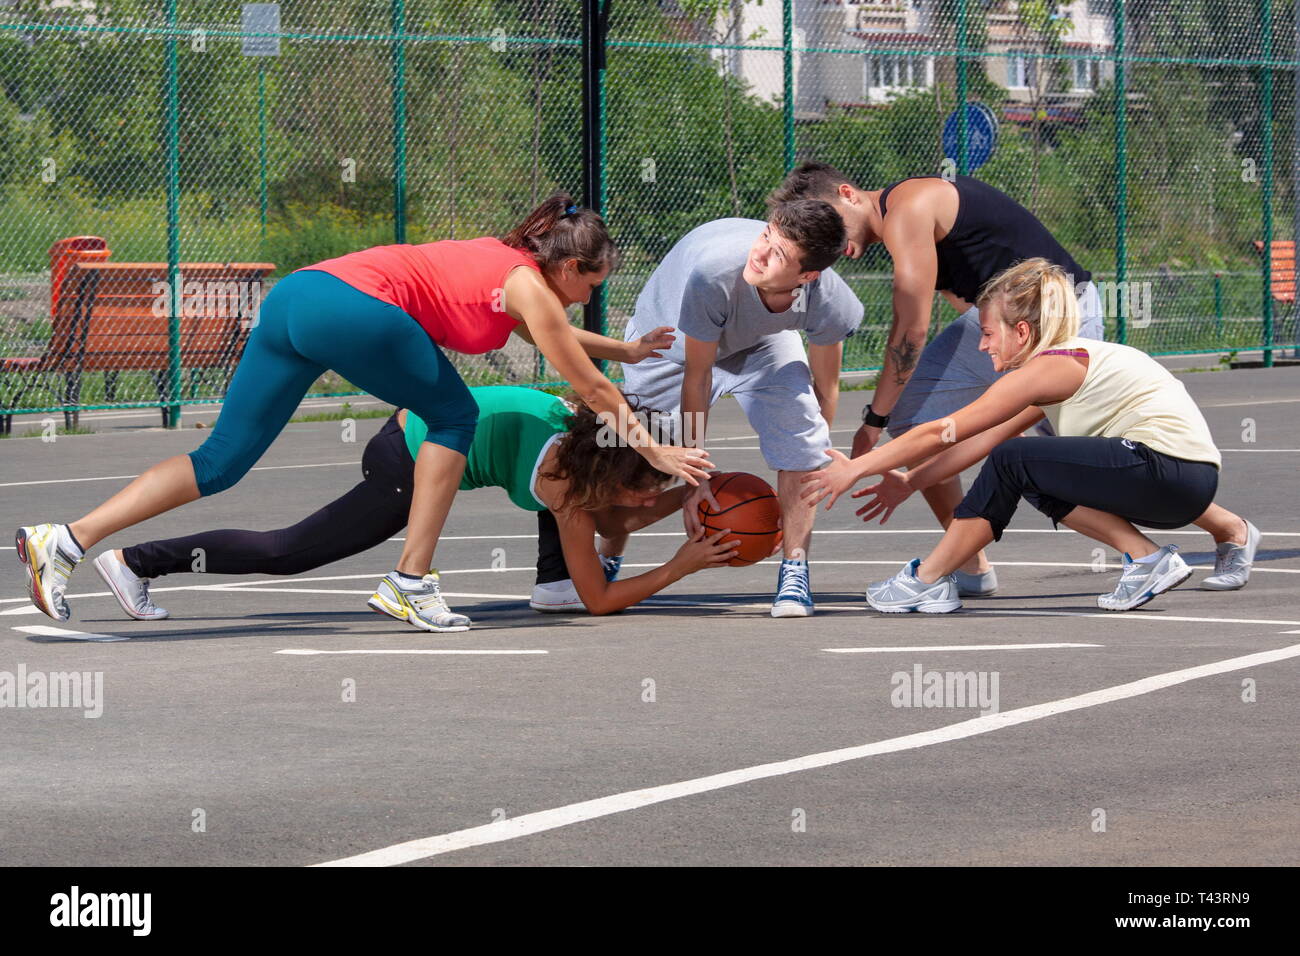 Mixed young people, men and women, playing basketball on a playground Stock Photo